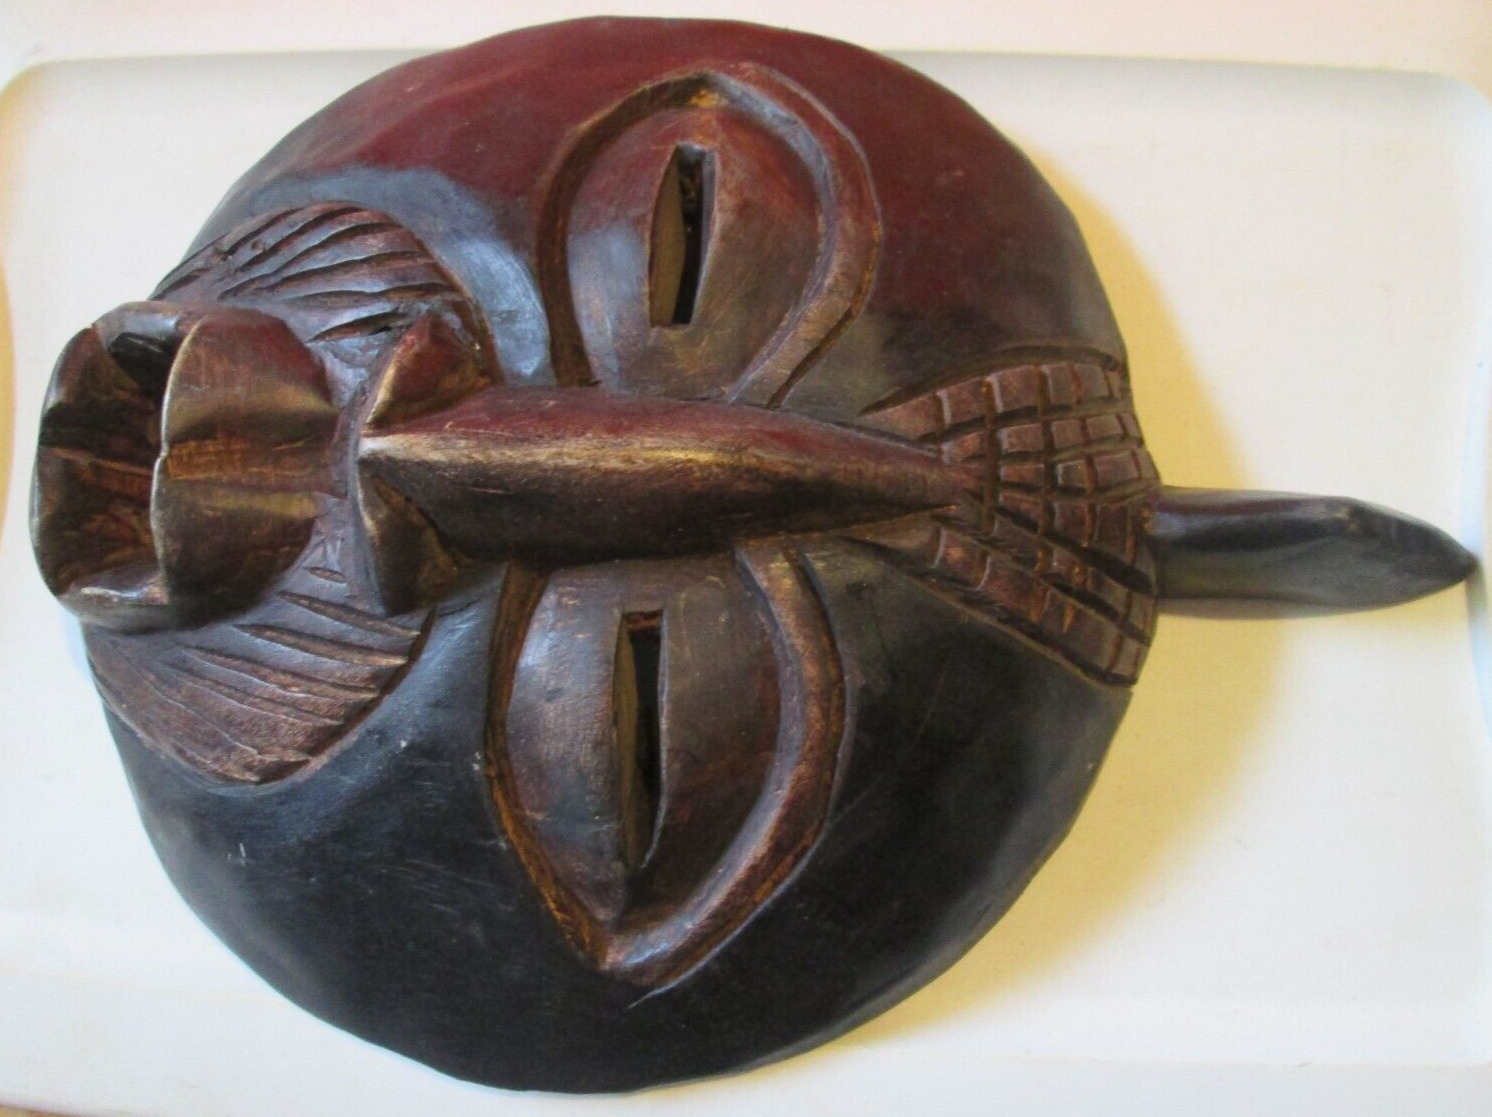 OLD VTG TRIBAL MASK OPEN MOUTH ROUND FACE CARVED WOOD GHANA AFRICAN BIRD MOTIF